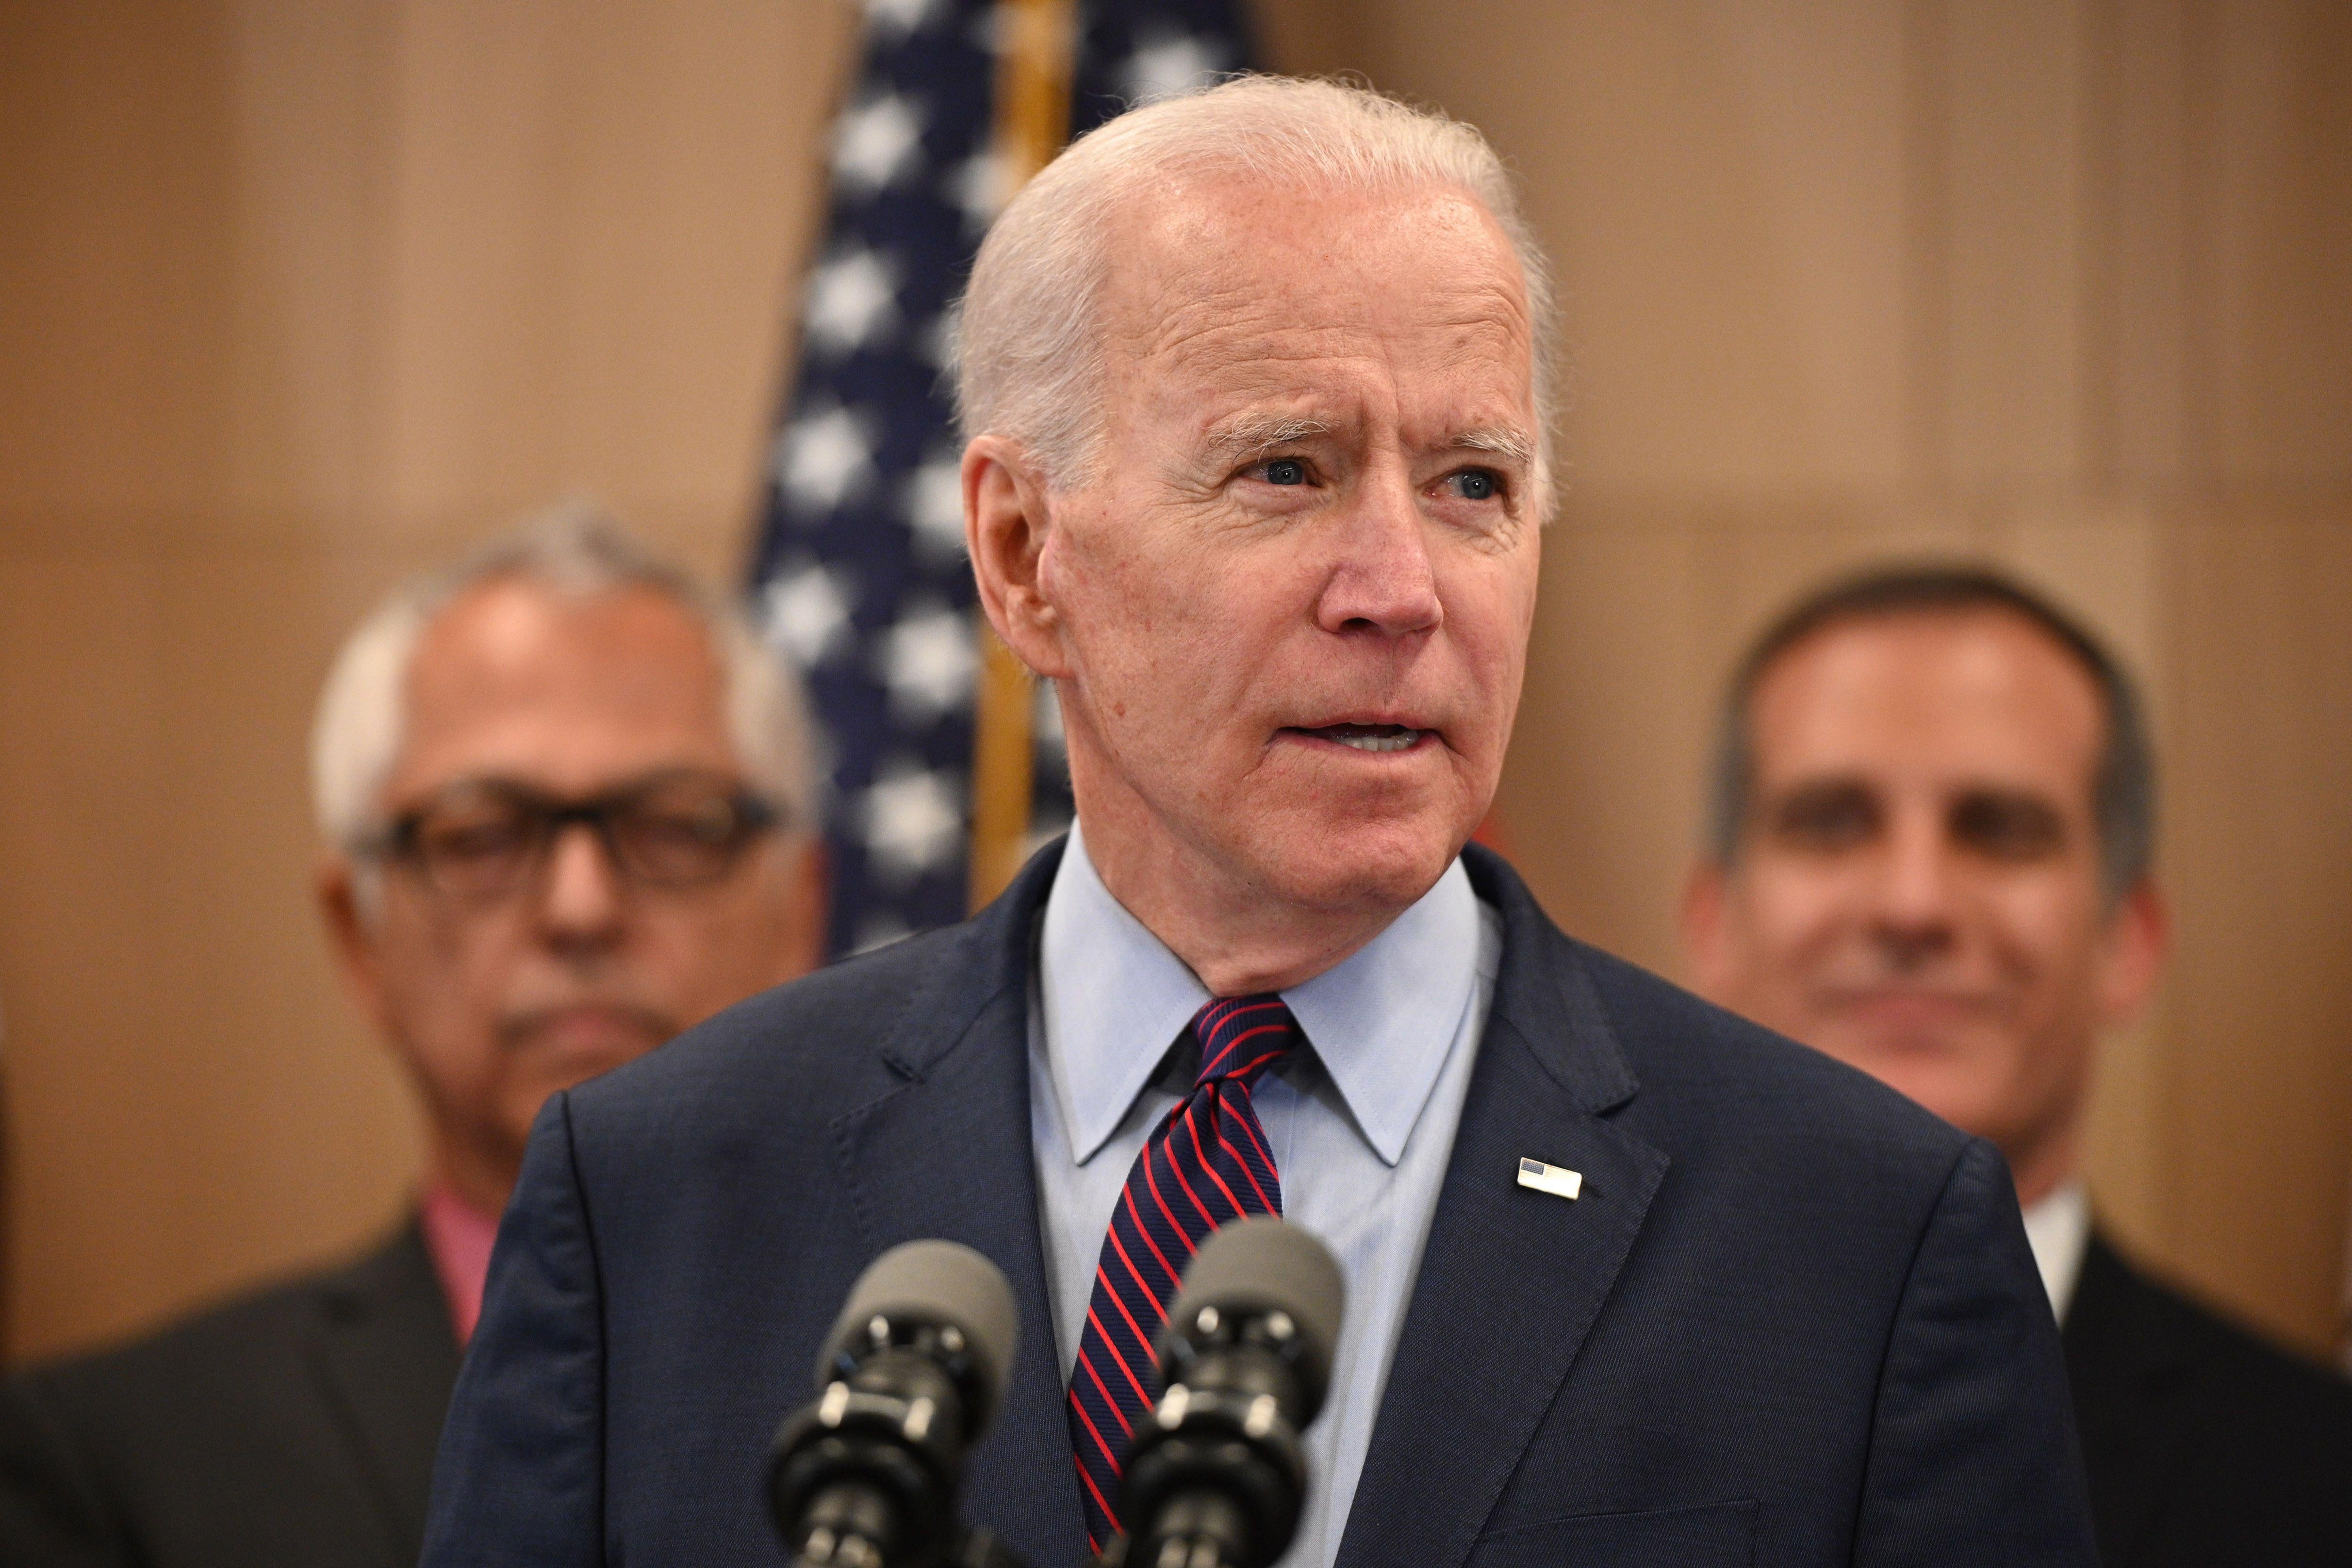 Joe Biden stands in front of two microphones, flanked by men on both sides of him.